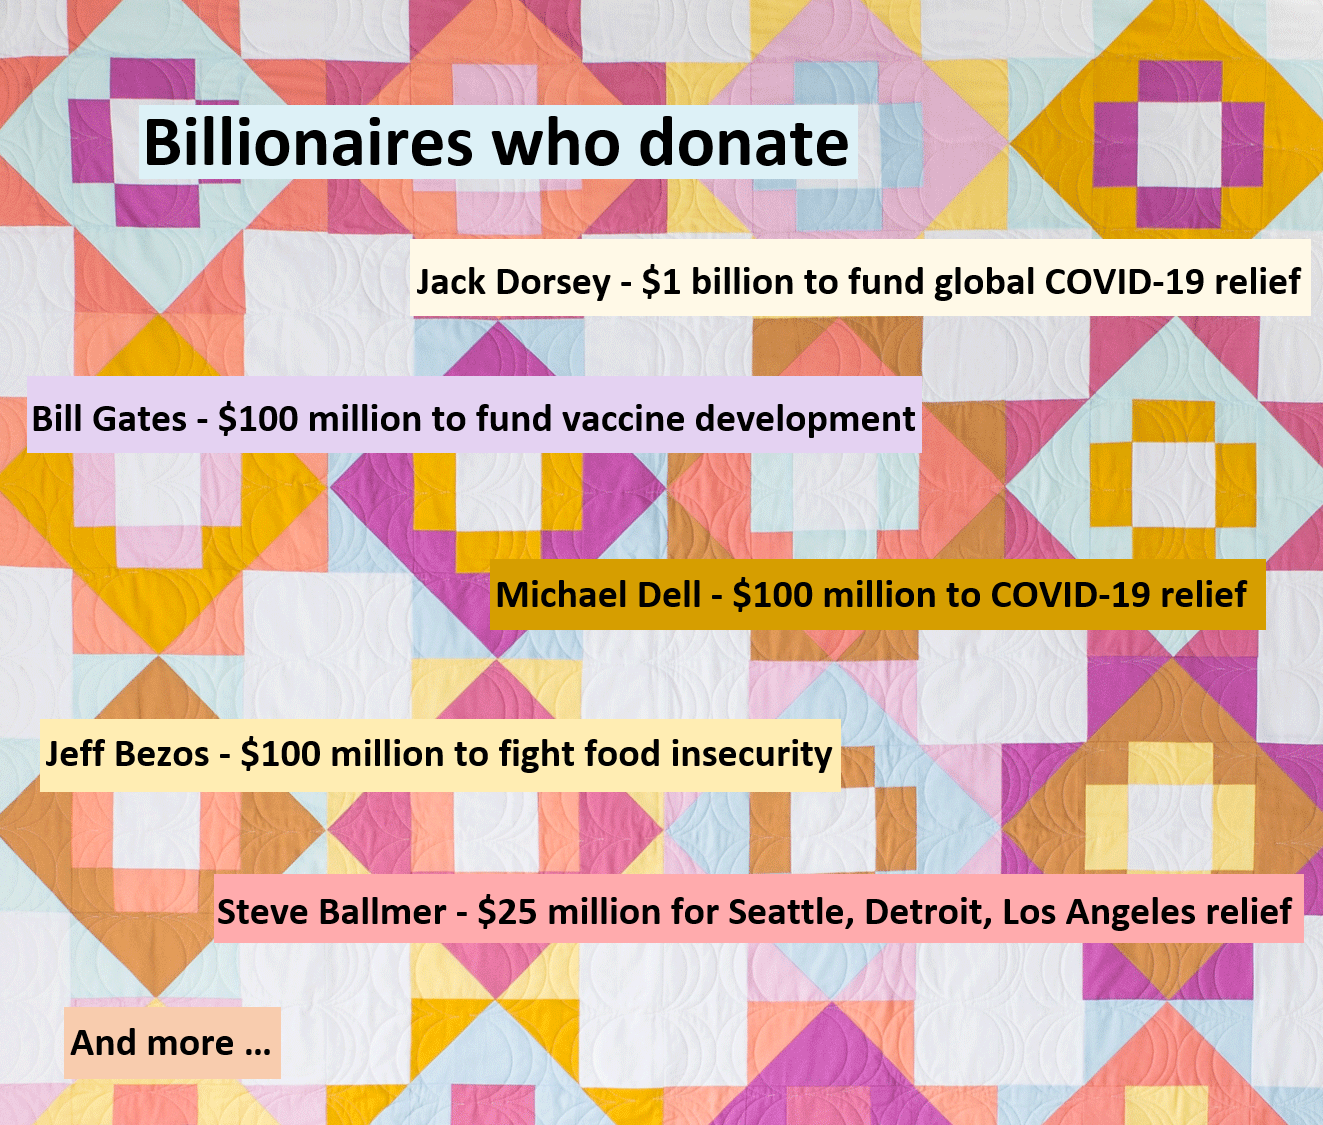 On quilt background:       Billionaires who donate   Jack Dorsey - $1 billion to fund global COVID-19 relief      Bill Gates - $100 million to fund vaccine development    Jeff Bezos - $100 million to fight food insecurity    Michael Dell - $100 million to COVID-19 relief   Steve Ballmer - $25 million for Seattle, Detroit, Los Angeles relief   And more … 